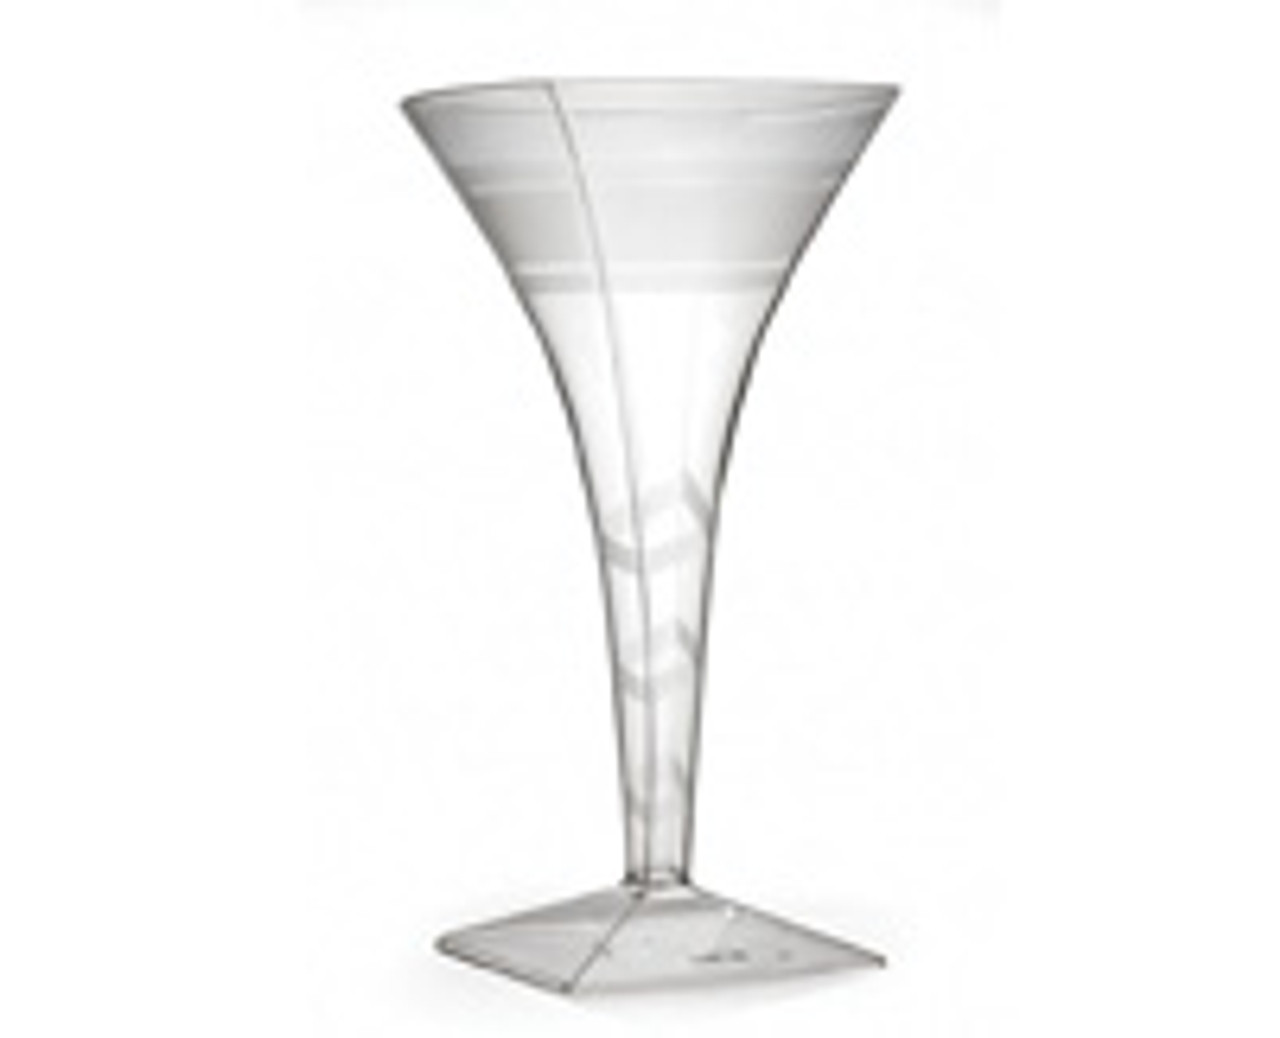 https://cdn11.bigcommerce.com/s-hgqmwywp99/images/stencil/1280x1280/products/51758/46536/wavetrends-8oz-plastic-square-martini-glasses-6ct-15__19071.1675880472.jpg?c=1?imbypass=on